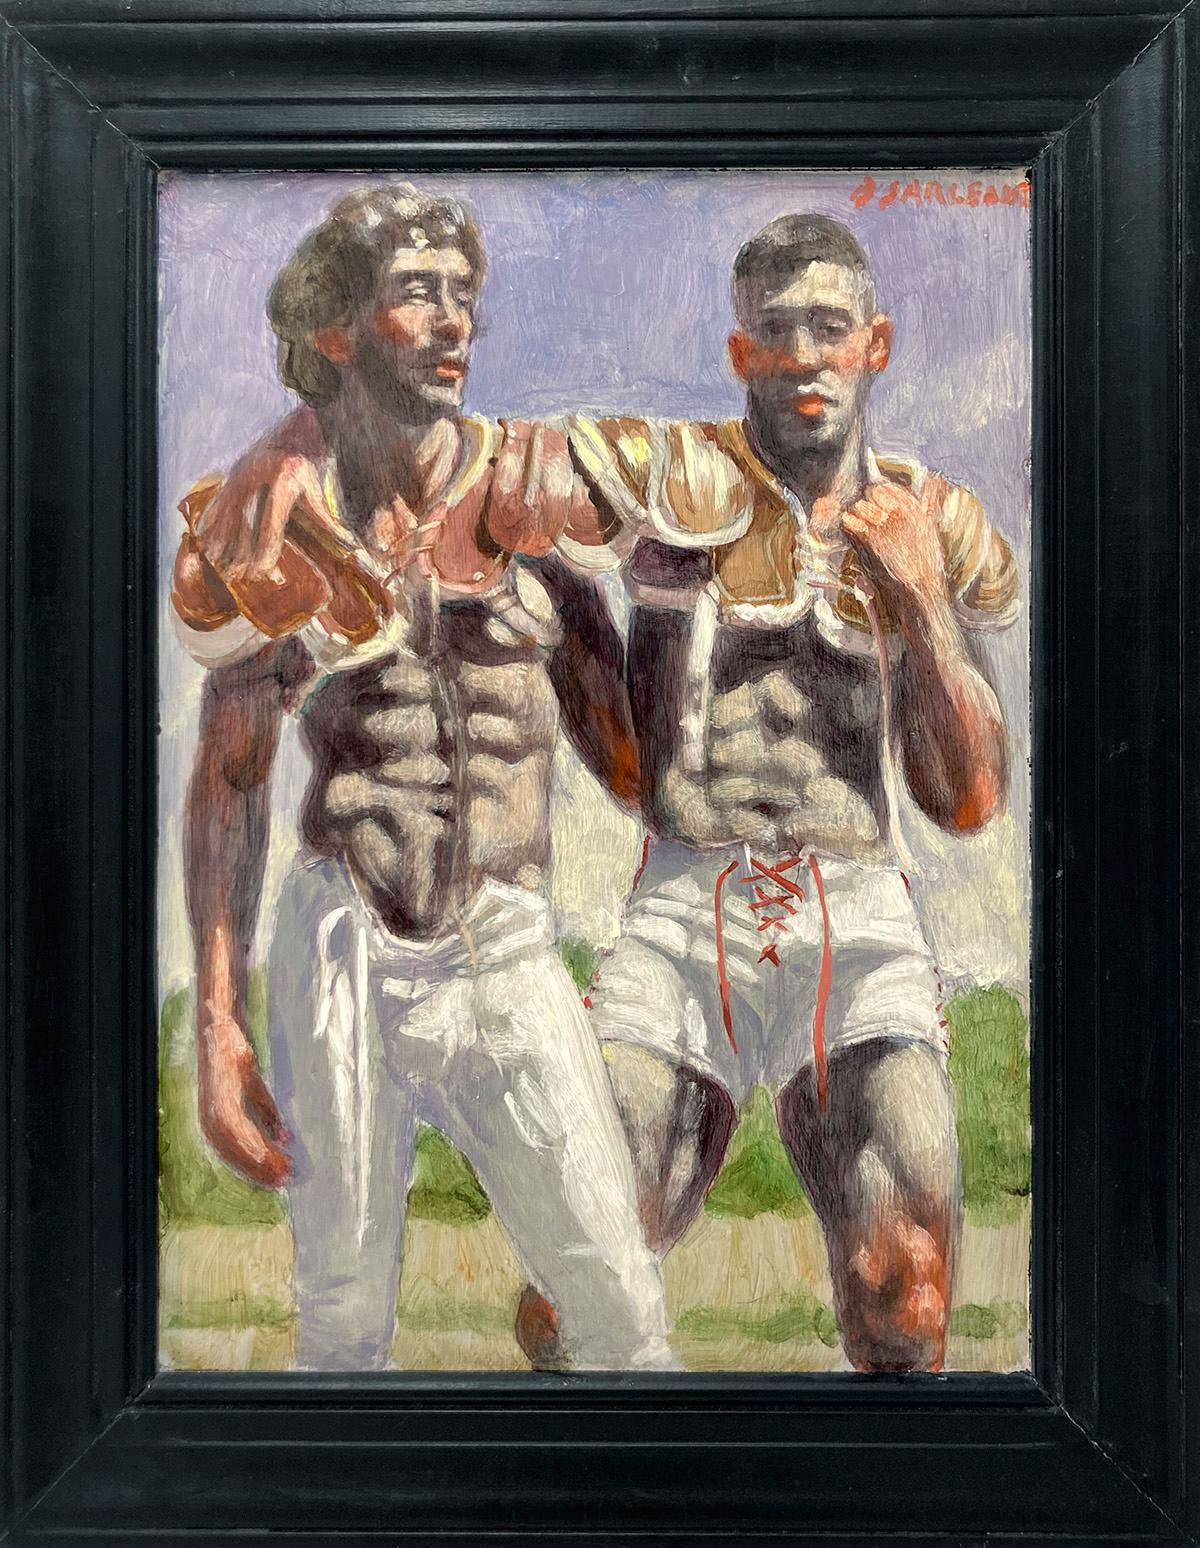 [Bruce Sargeant (1898-1938)] Two Members of the Winning Team - Painting by Mark Beard